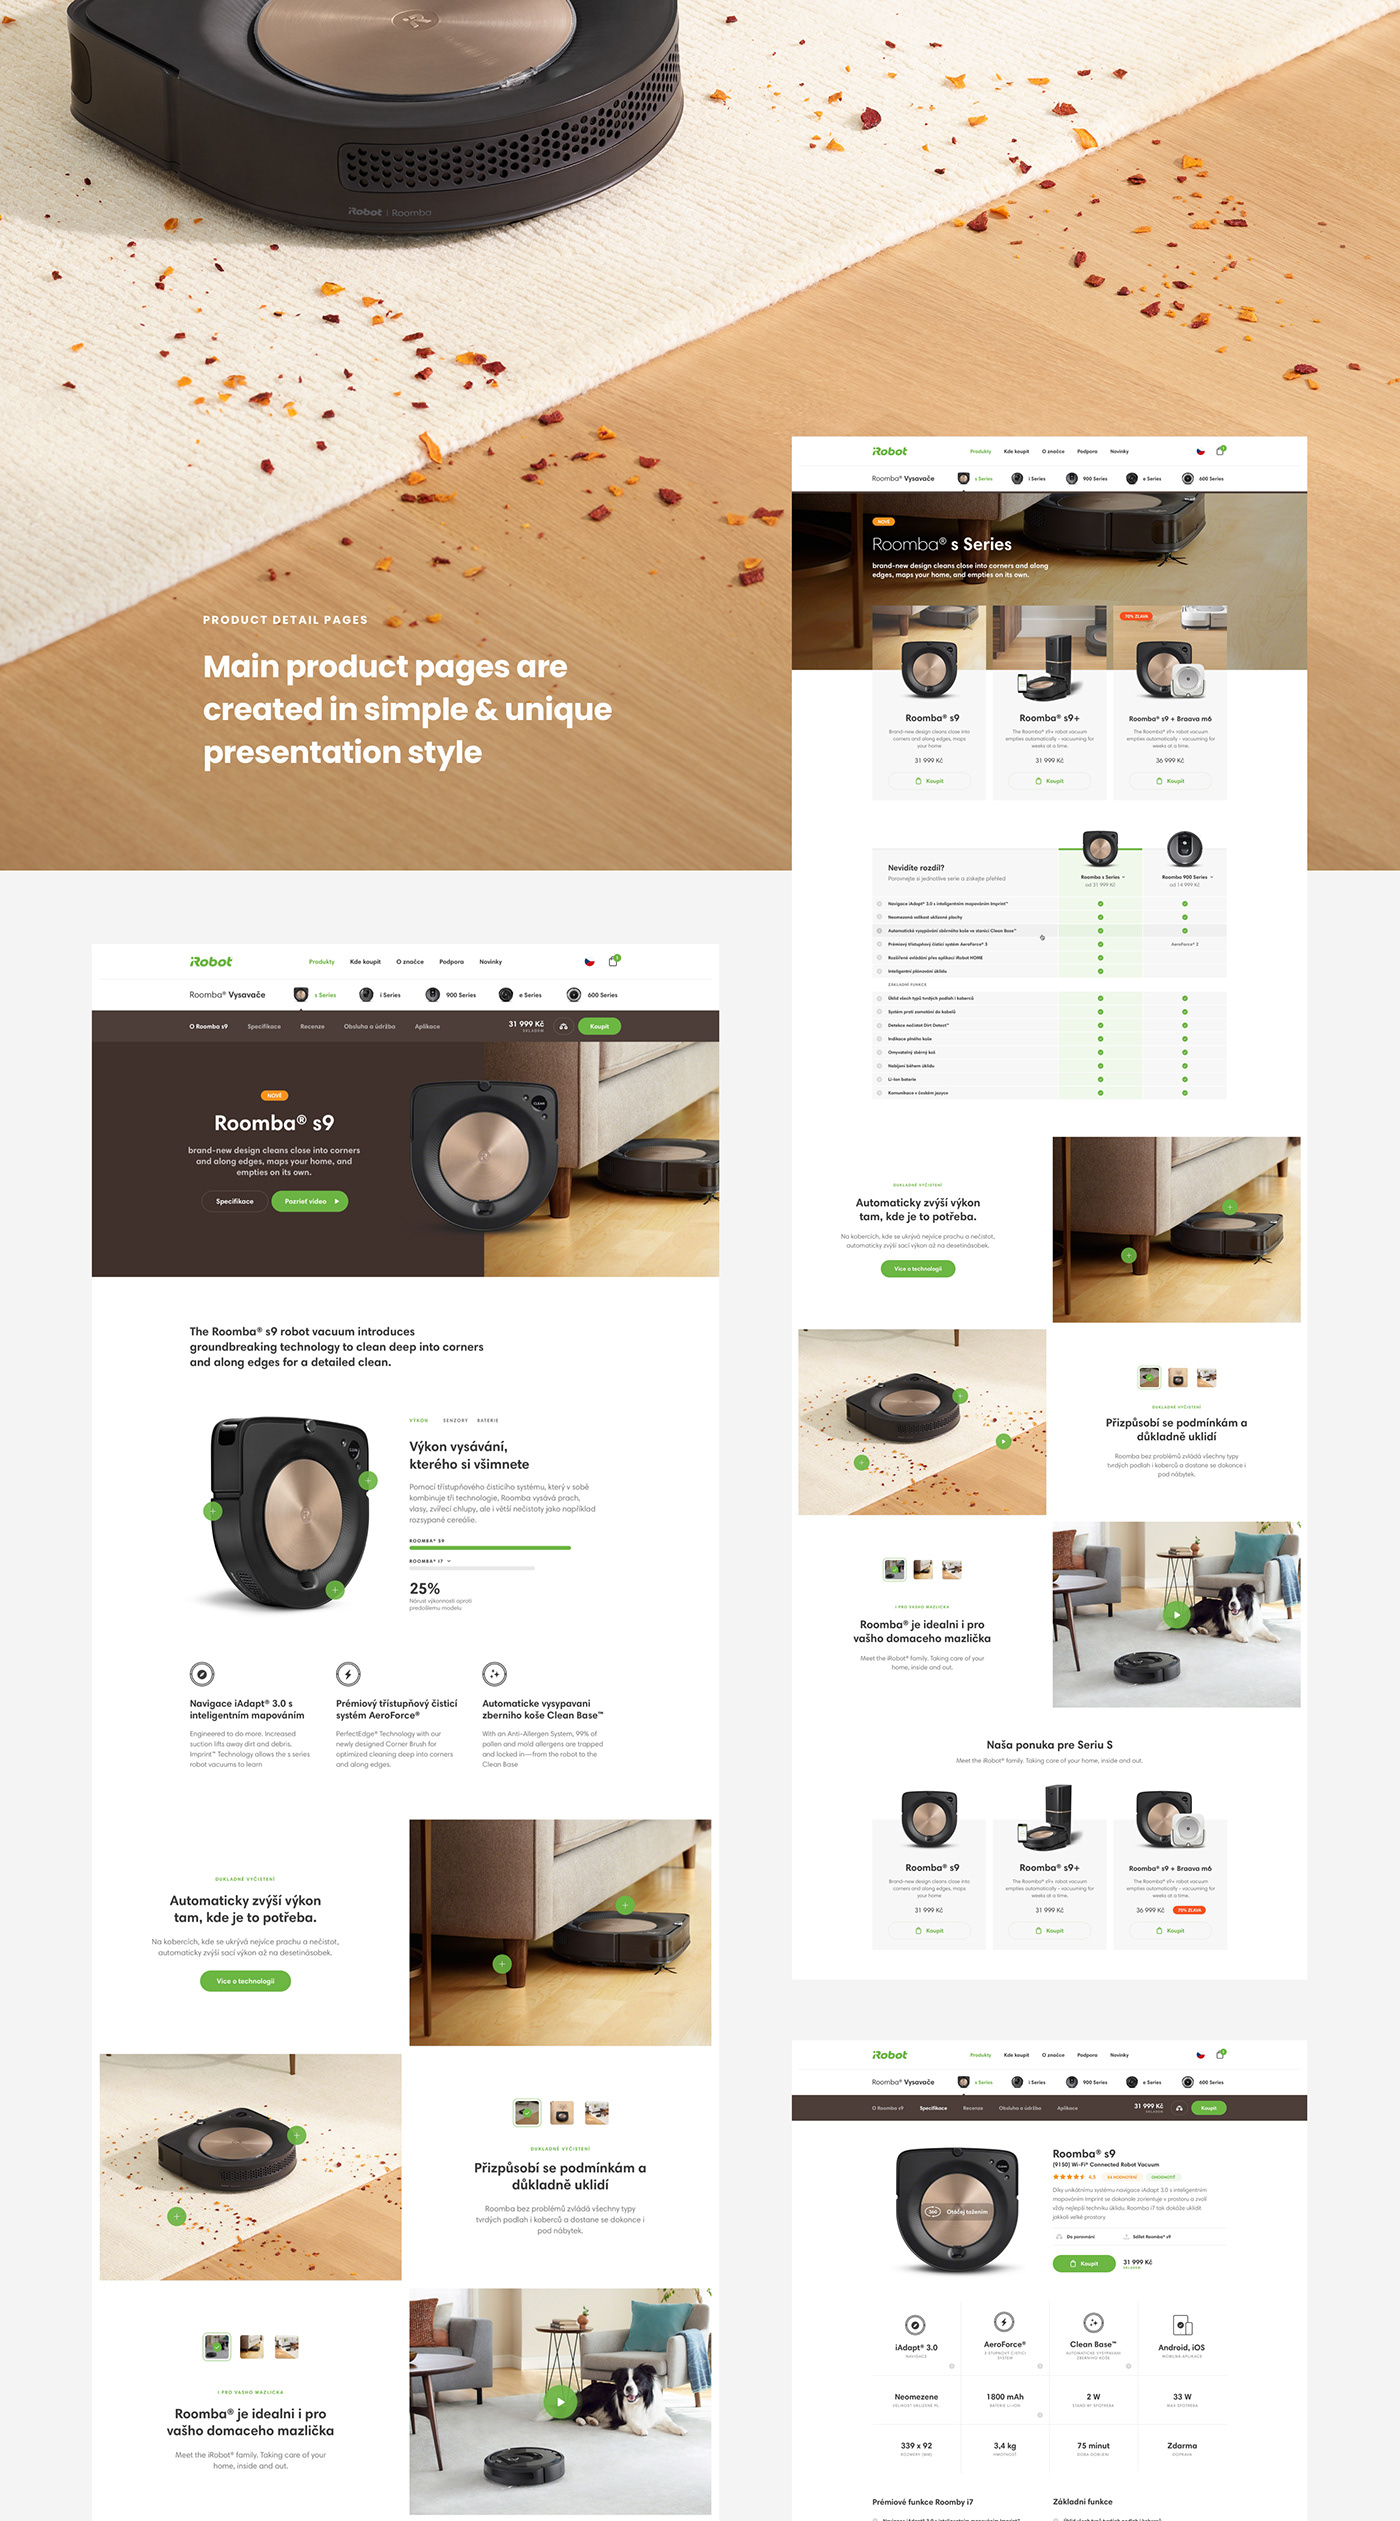 iRobot product pages